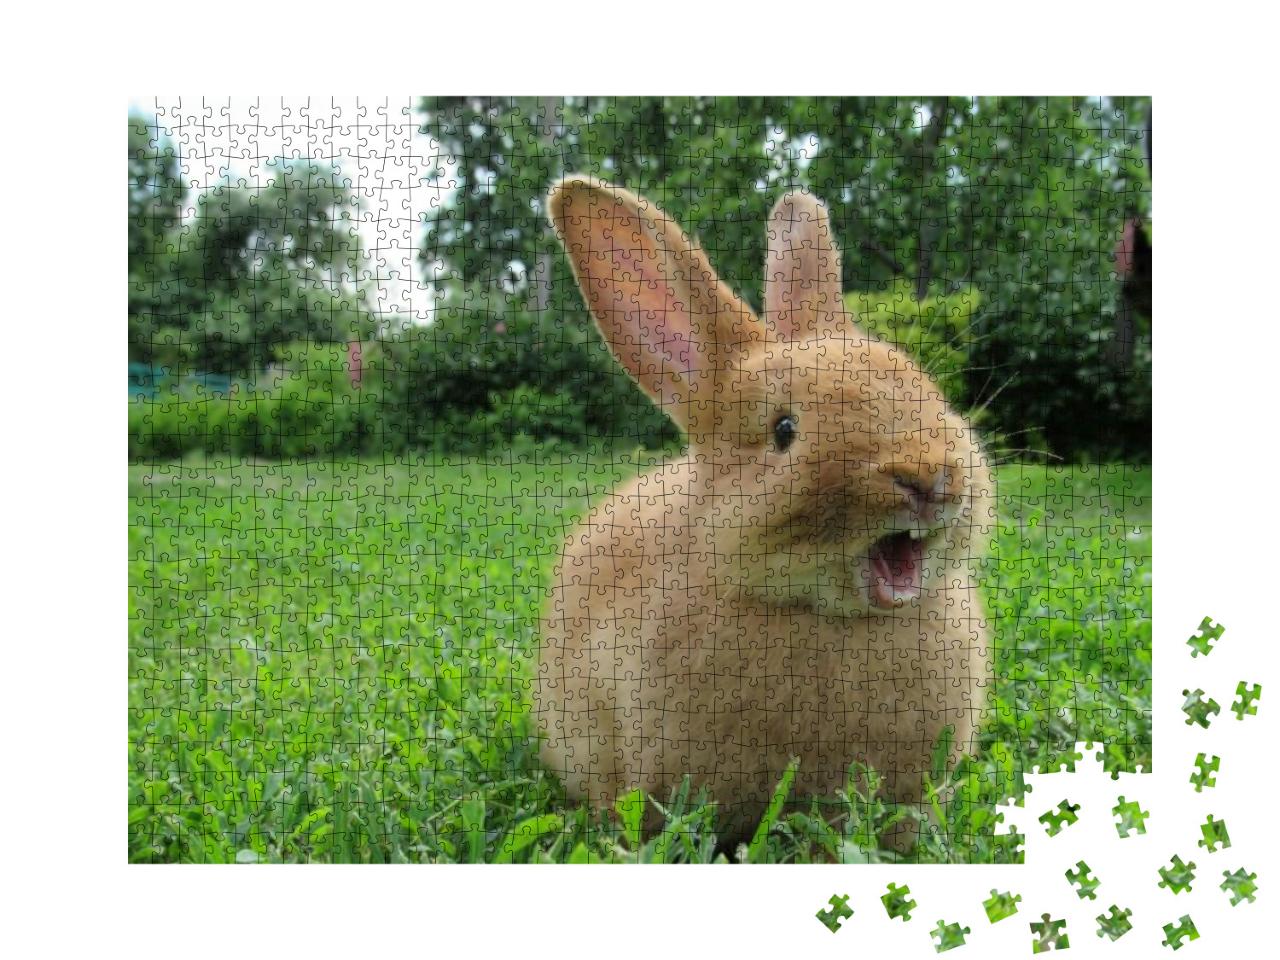 Red Rabbit on Green Grass. Home Decorative Rabbit Outdoor... Jigsaw Puzzle with 1000 pieces